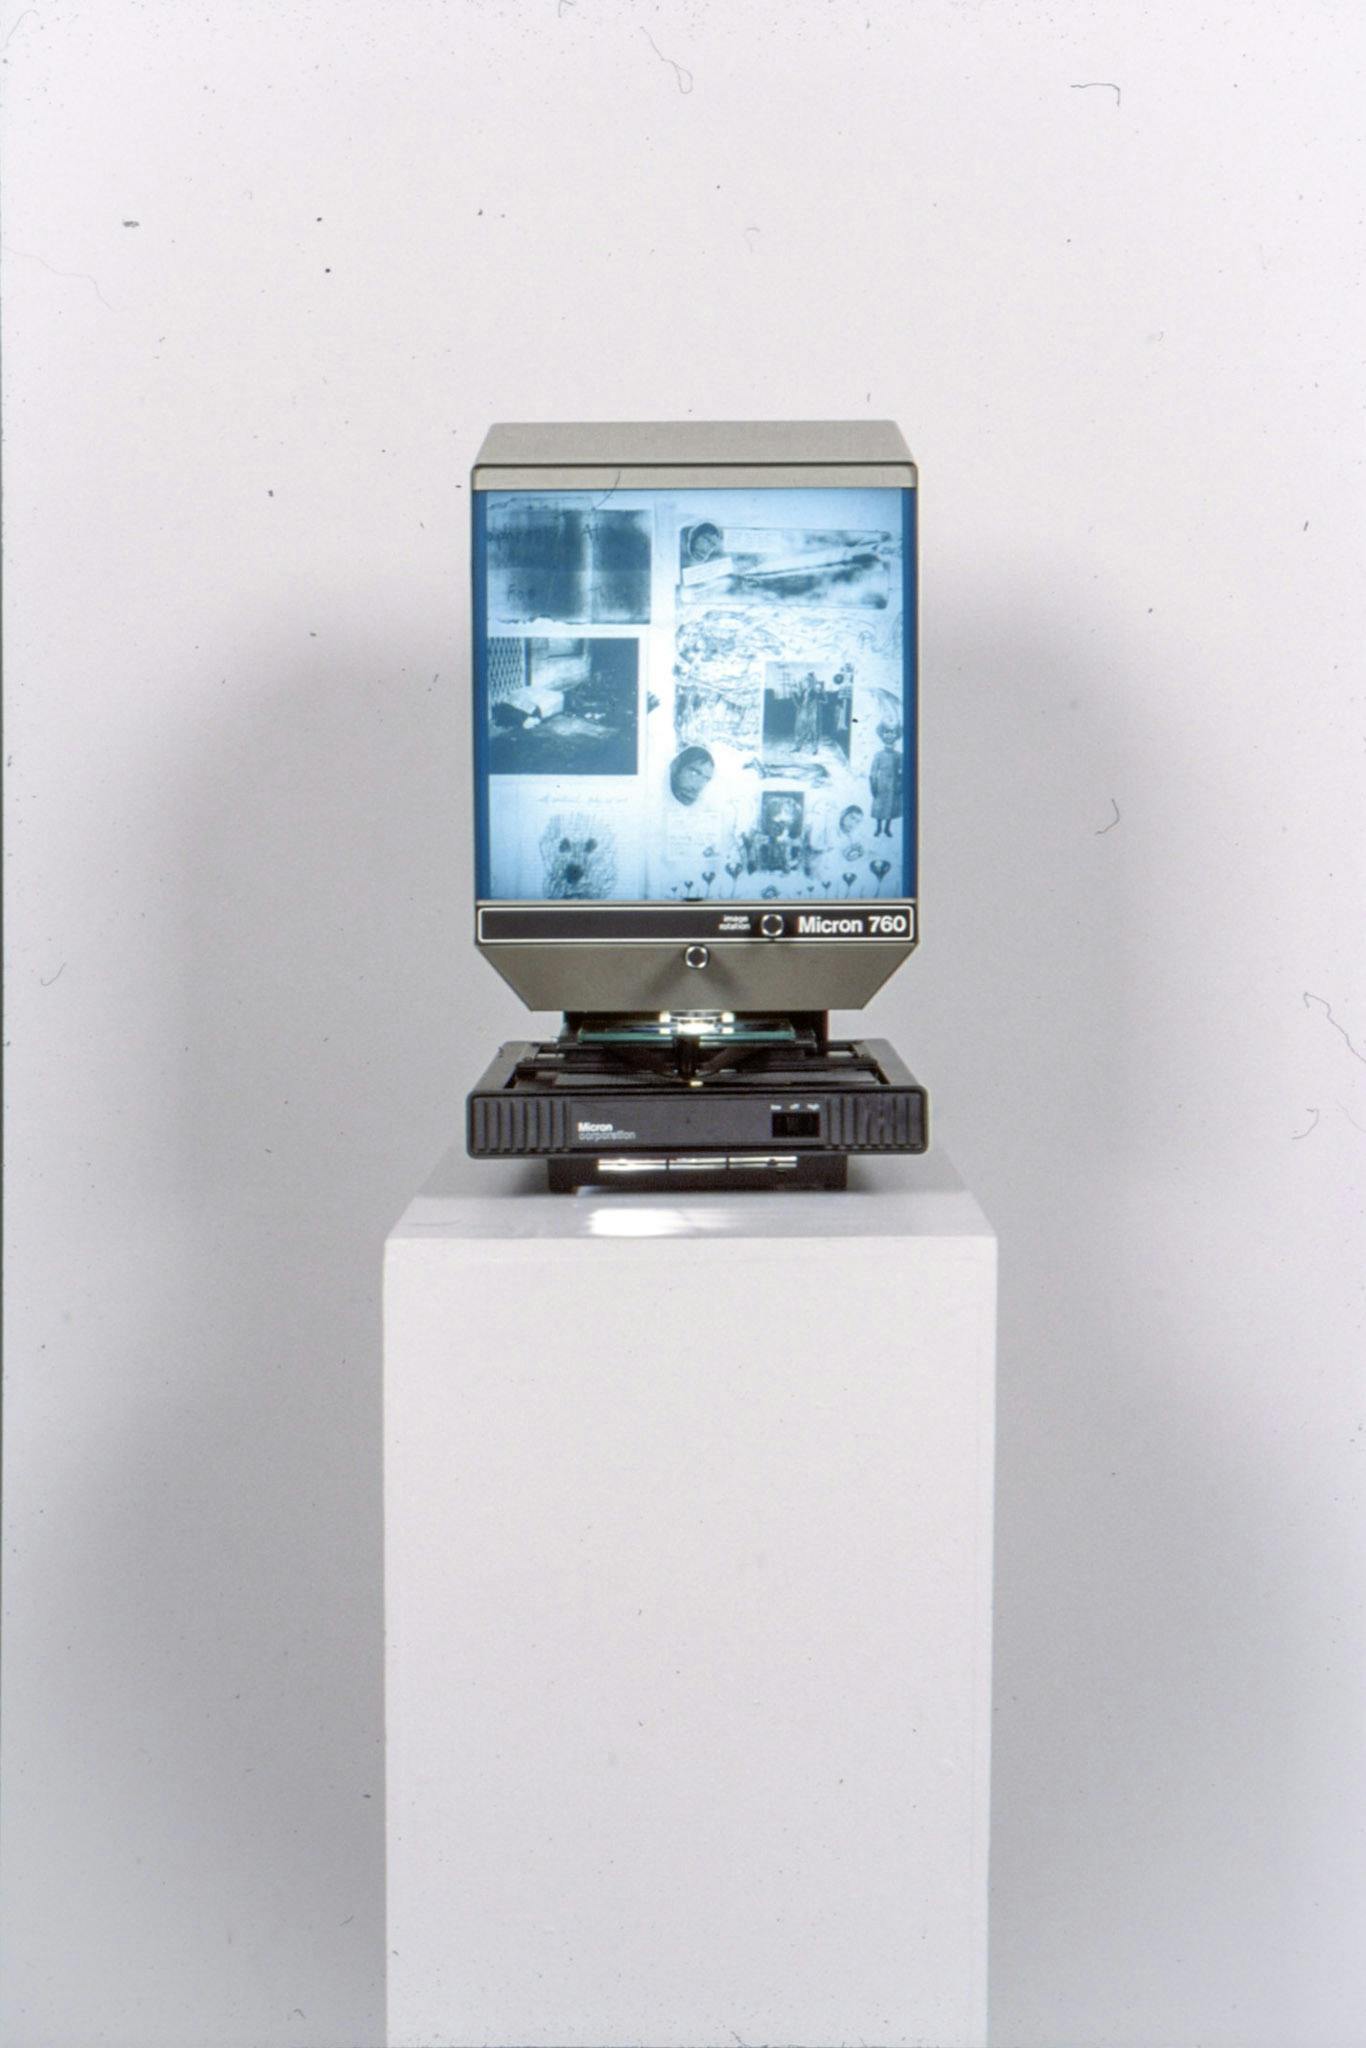 An installation image of artworks in a gallery. A machine named Micron 760, which looks like a desktop, is placed on a pedestal. The machine shows the collaged image of various drawings on its screen.